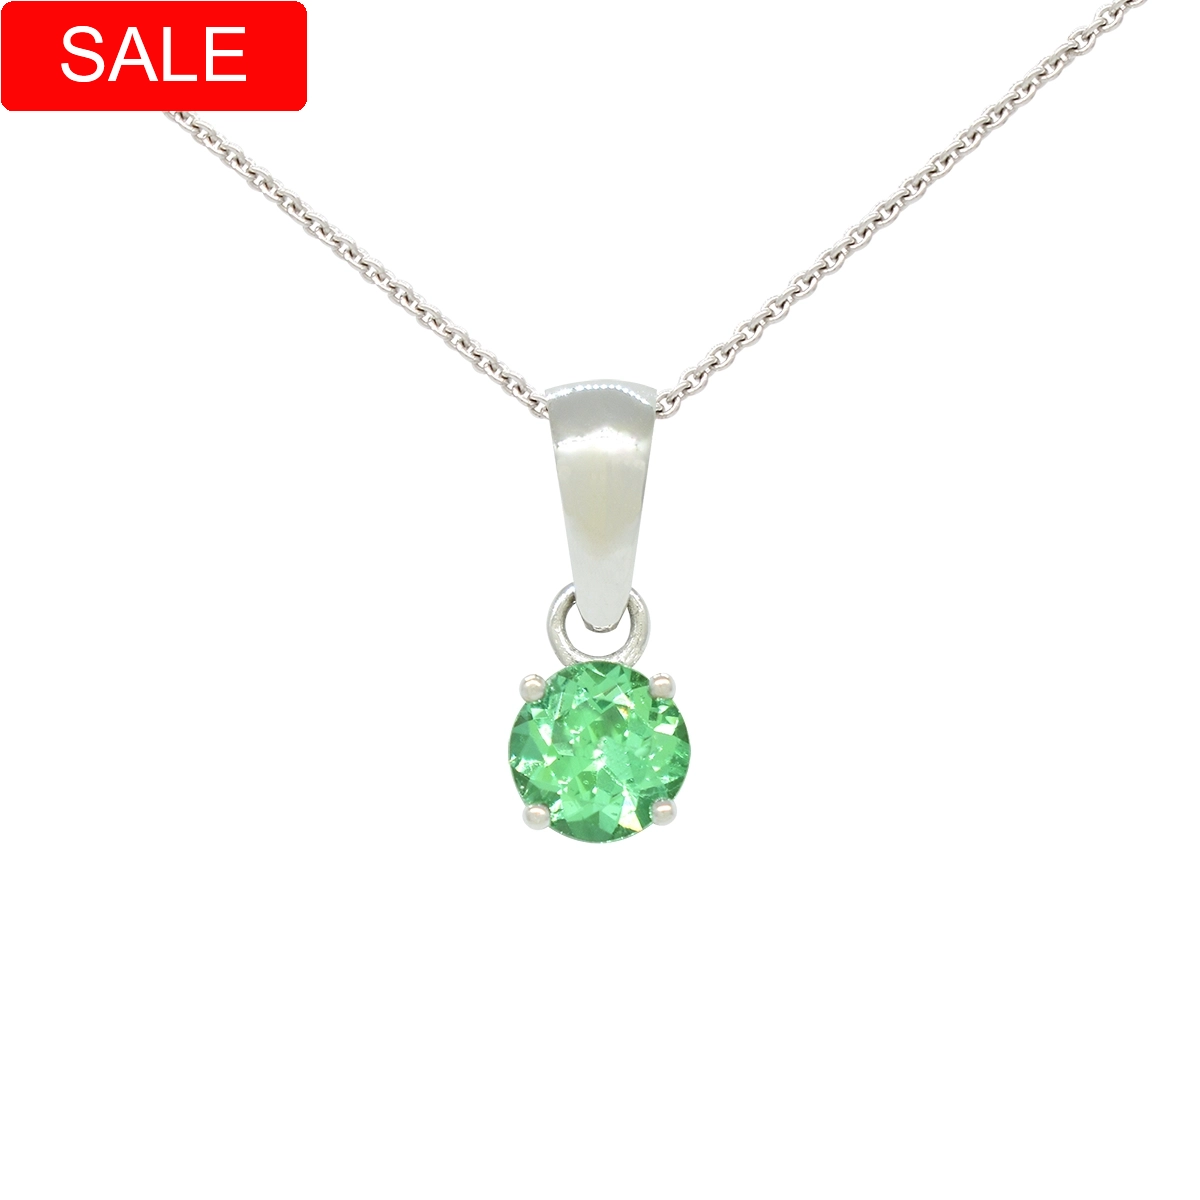 Solitaire emerald pendant in 18K white gold with 0.50 Ct. round cut natural Colombian emerald set classic 4-prong setting